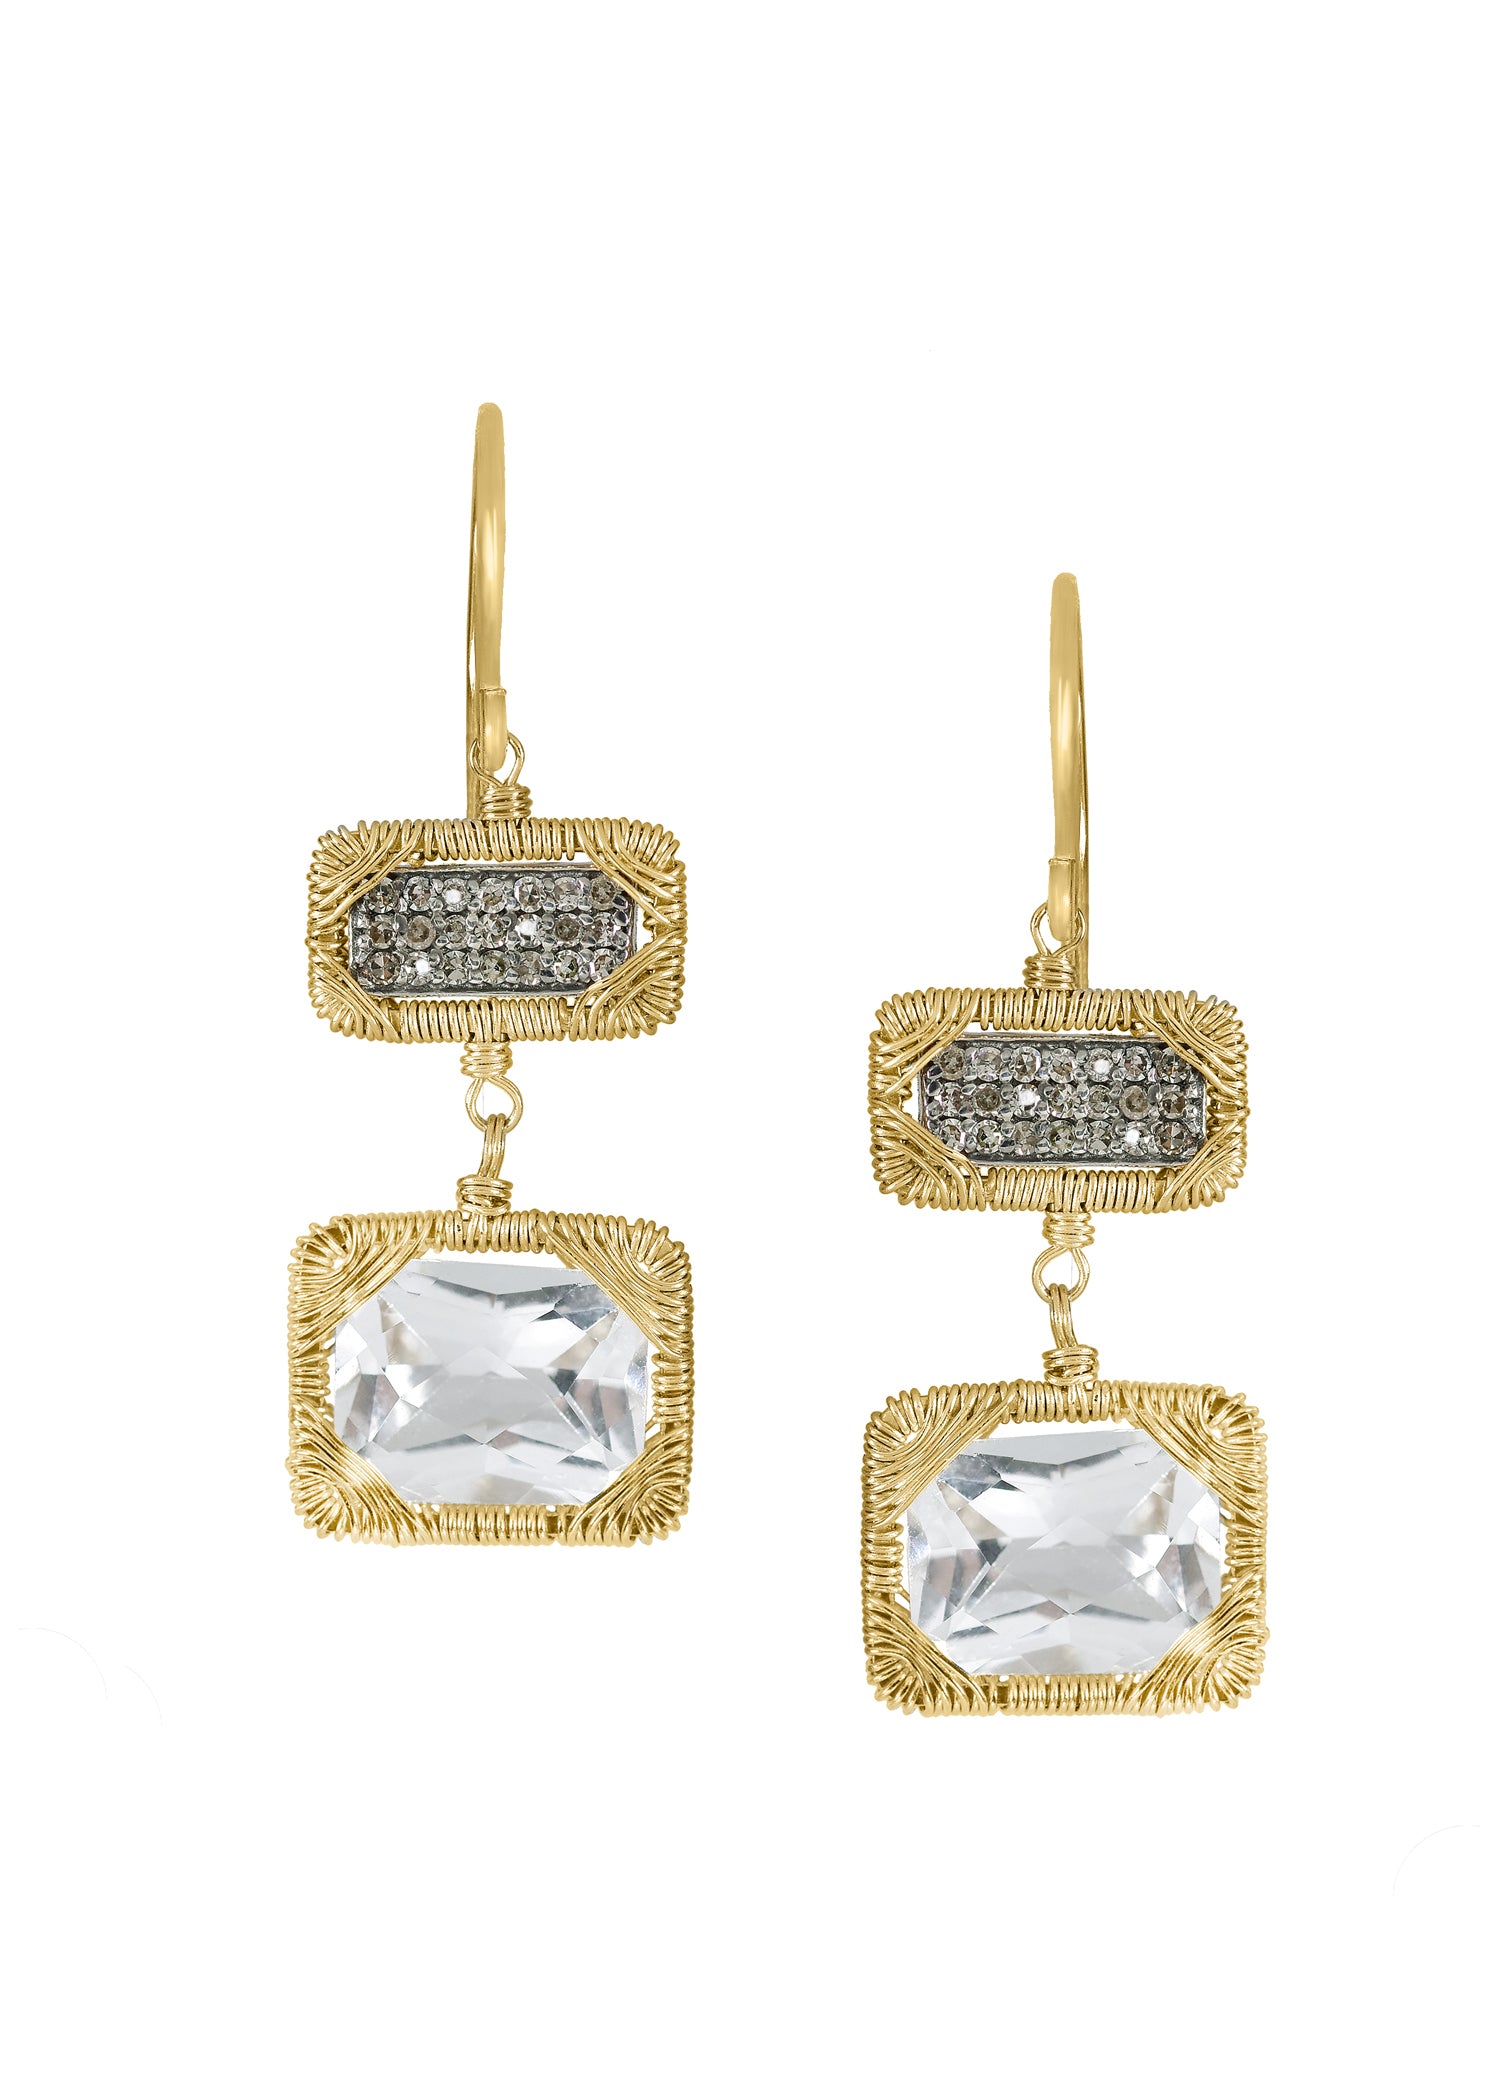 Diamond White topaz 14k gold Sterling silver Mixed metal Earrings measure 1-1/4" in length (including the ear wires) and 7/16" in width at the widest point Handmade in our Los Angeles studio